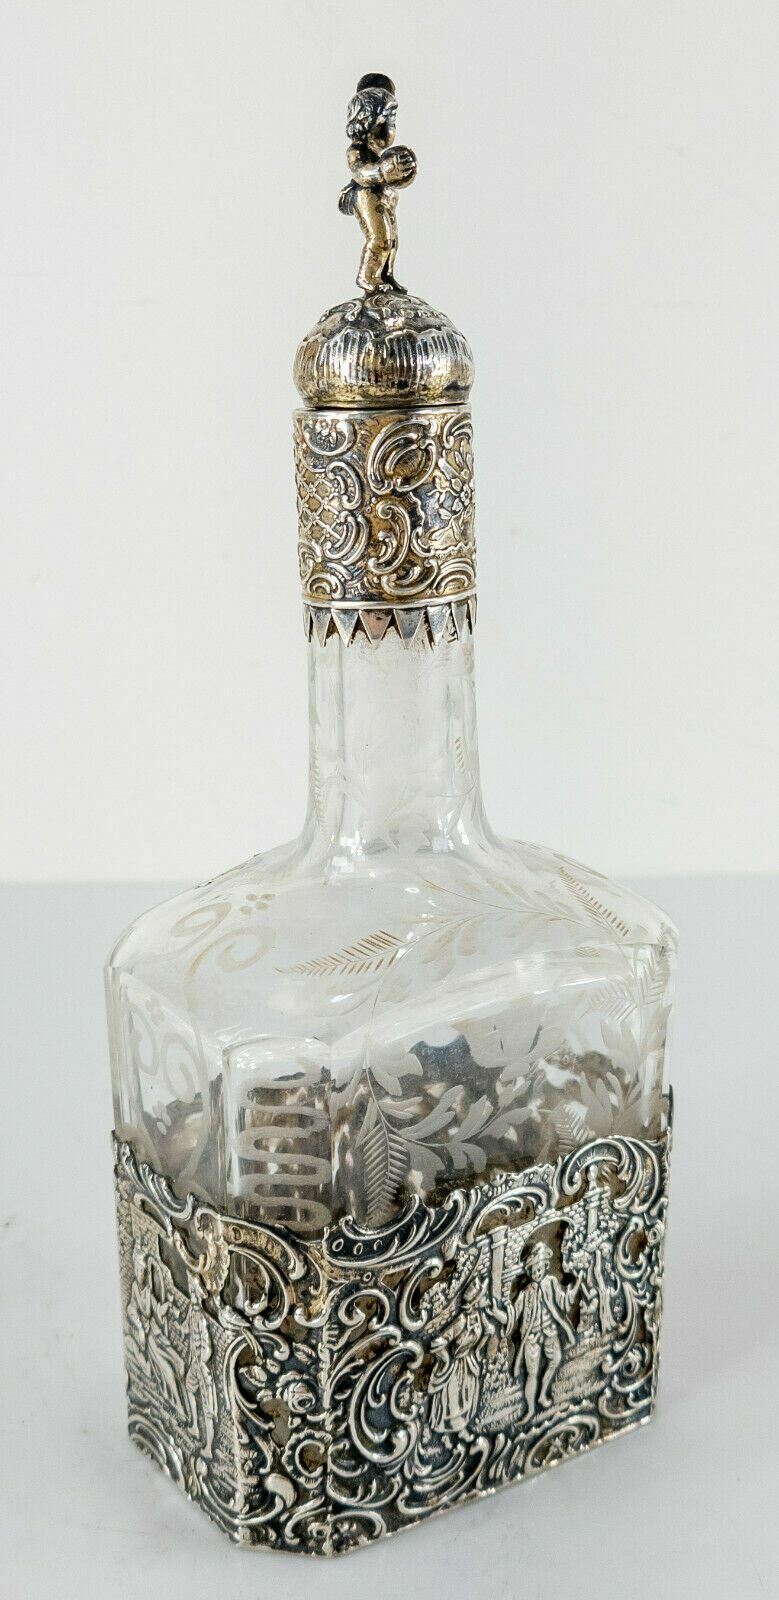 Antique 17th Century German Hallmarked Silver and Etched Glass Decanter Bottle